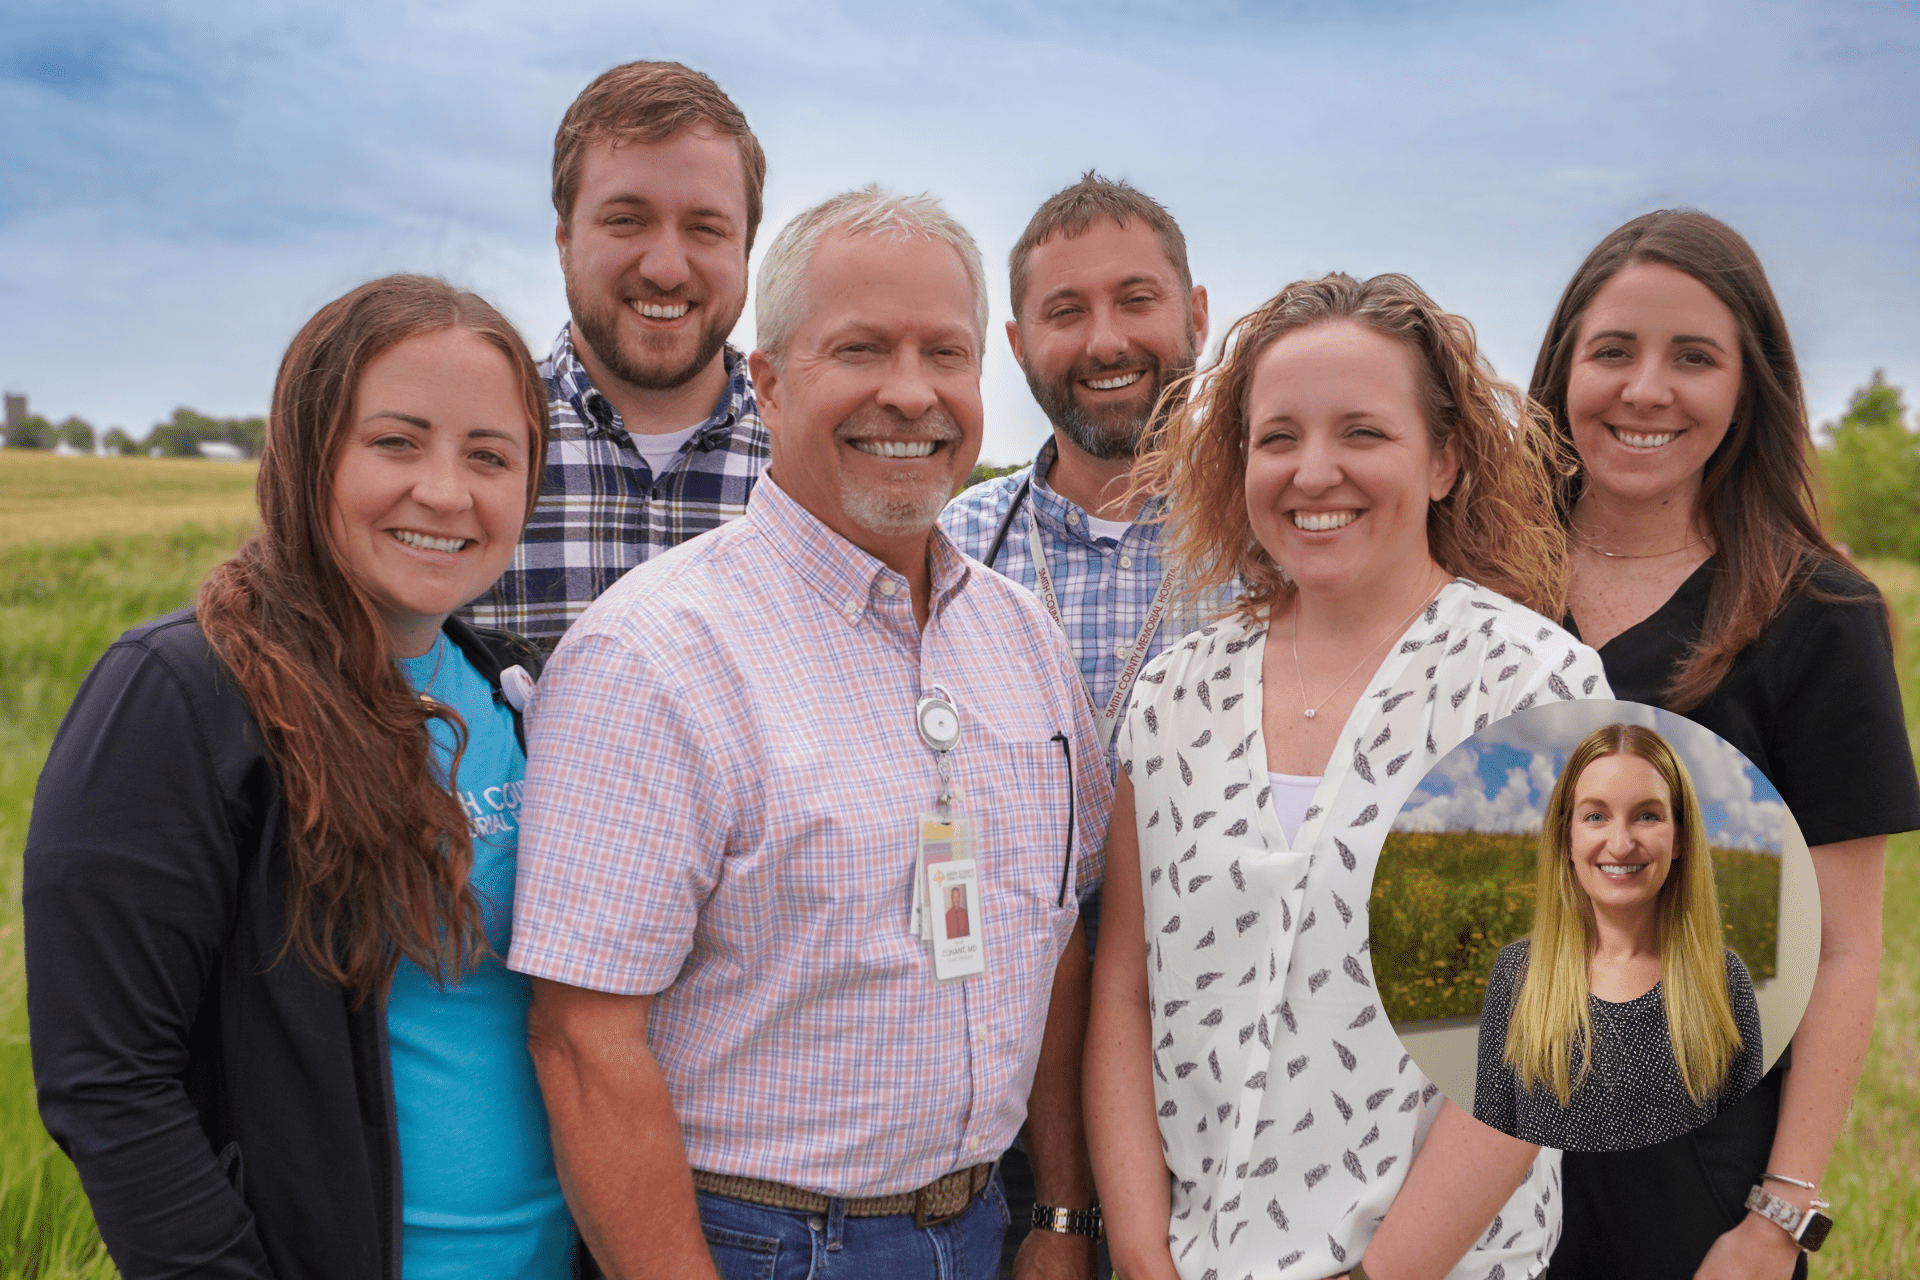 Smith County Family Practice Providers smile for a photo outside the hospital with a field in the background.